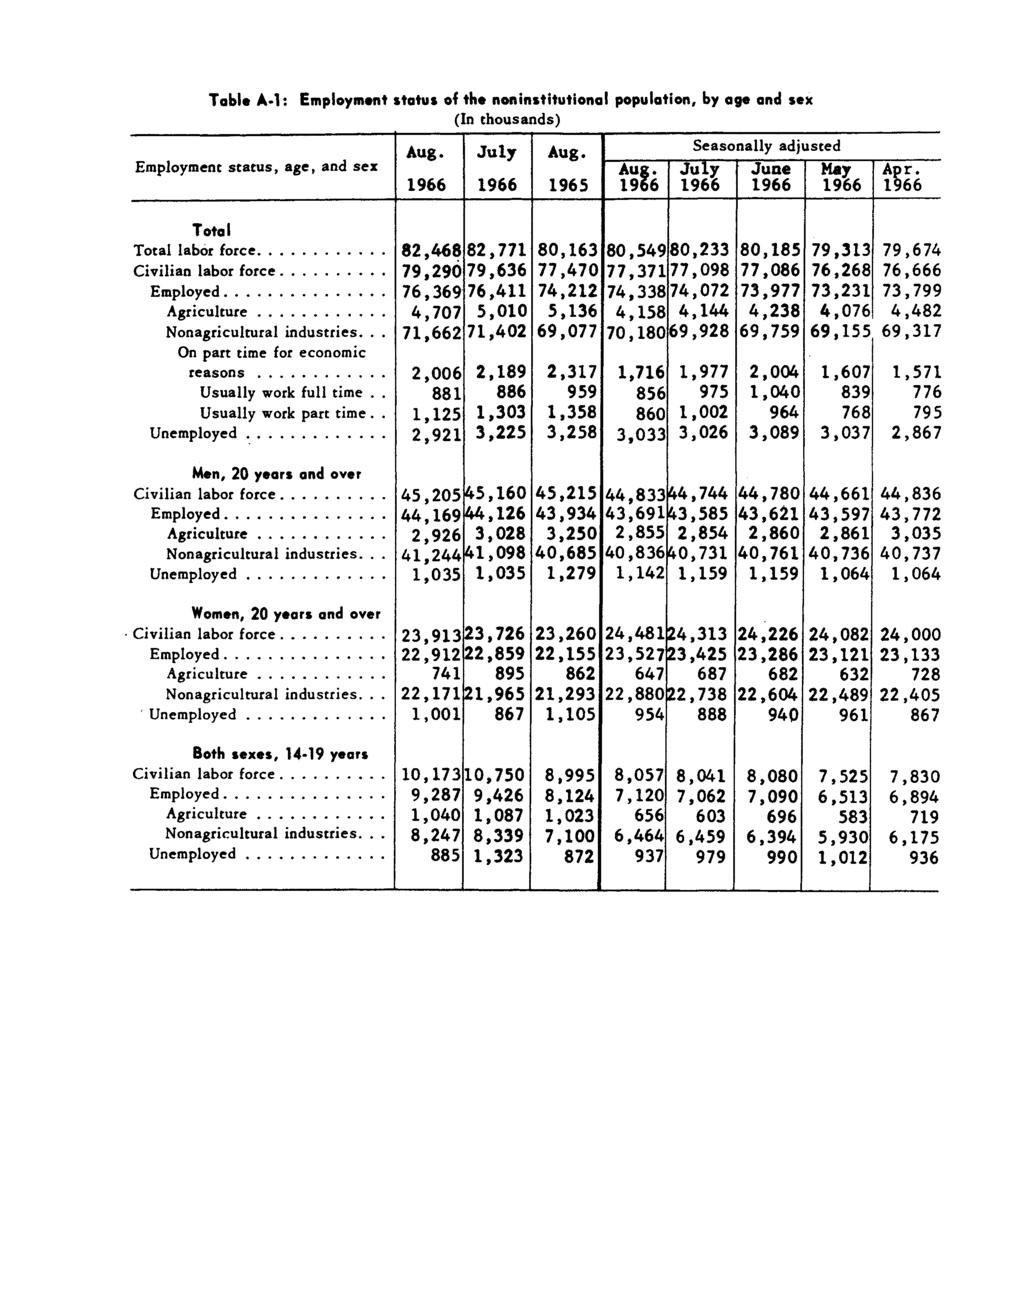 Table A-l: Employment status of the noninstitutional population, by age and sex (In thousands) Employment status, age, and sex Seasonally adjusted May A p r. Total Total labor force.